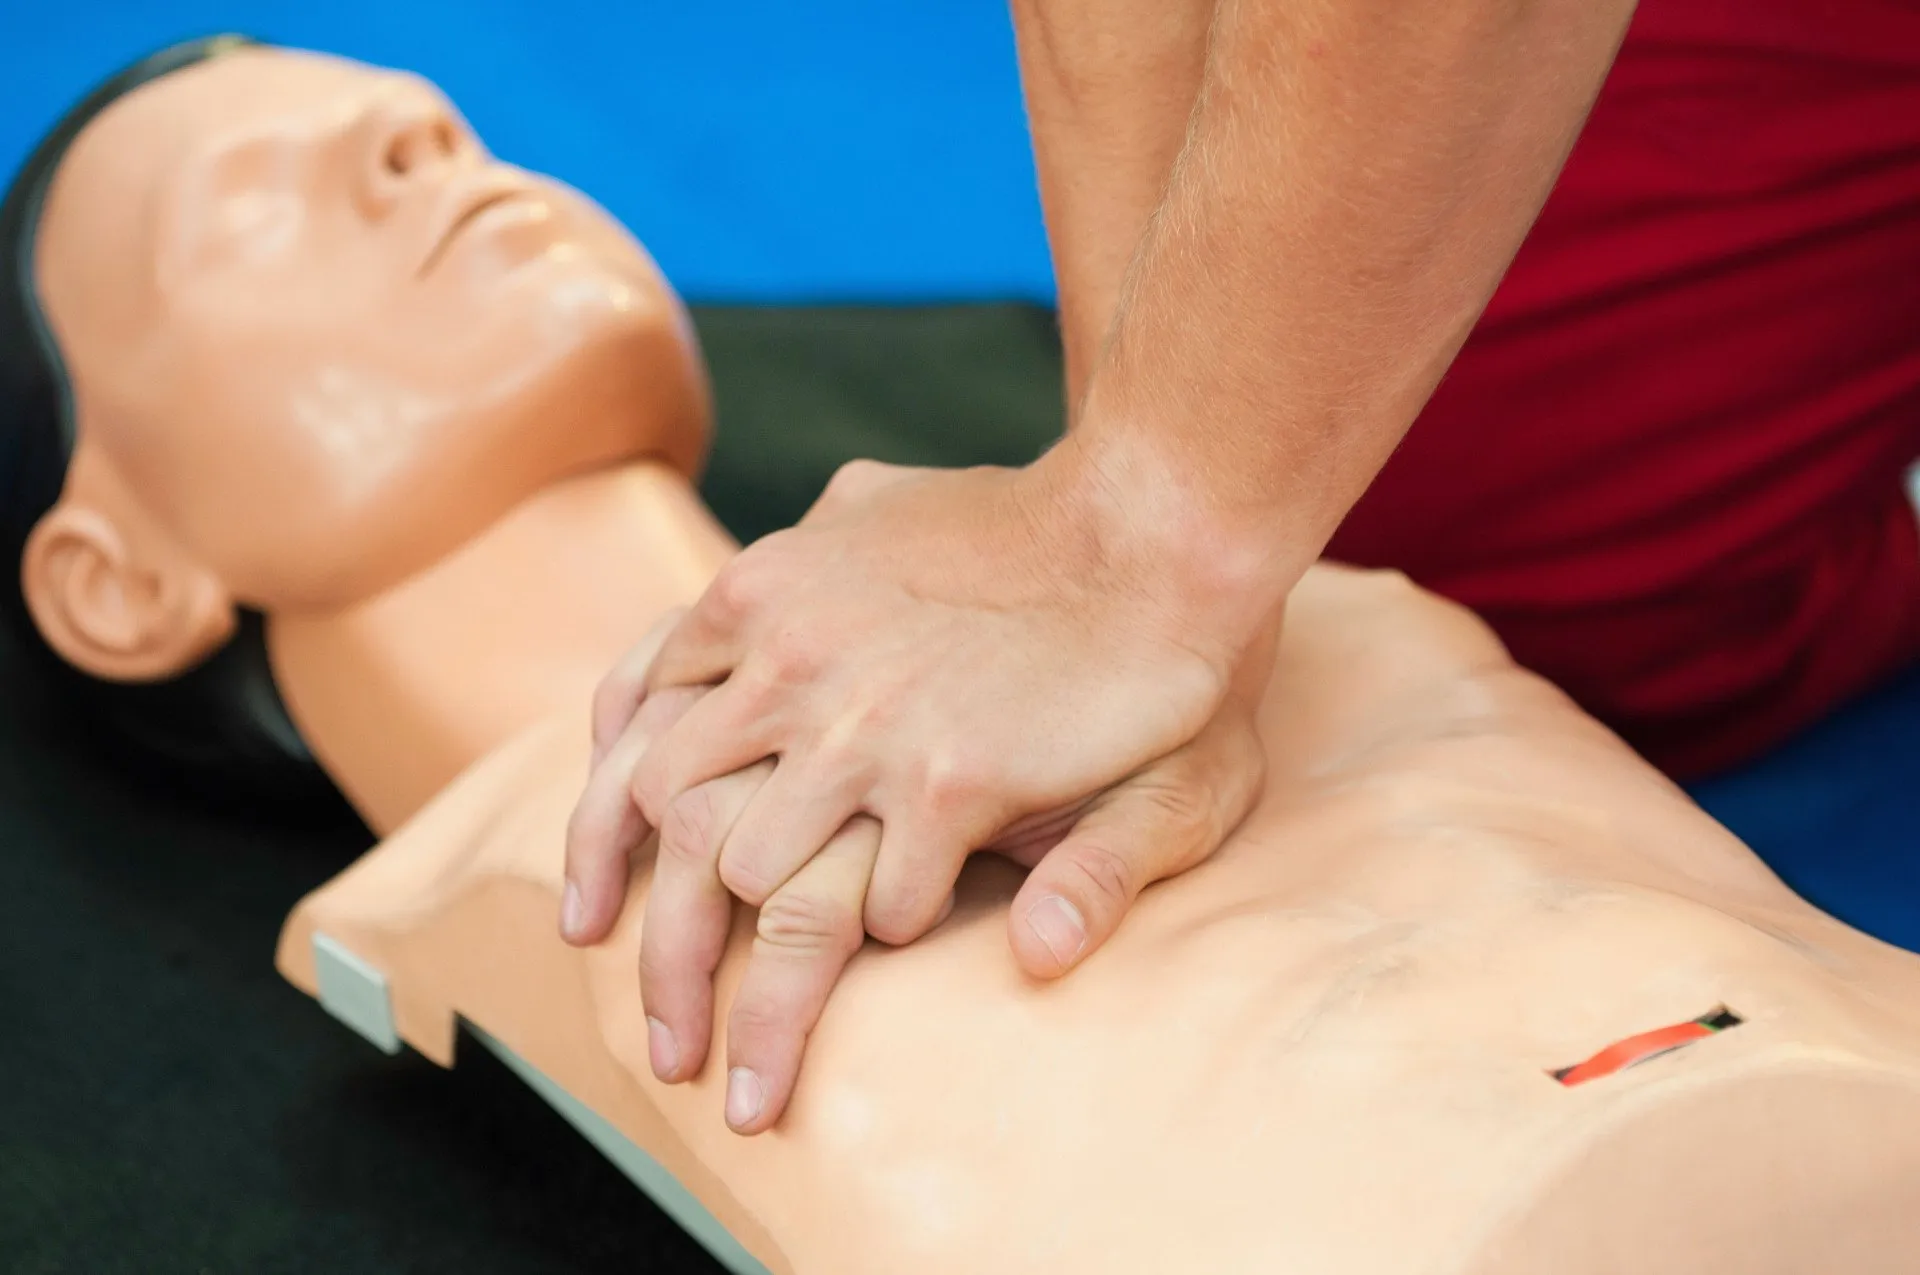 cpr training courses humble college station tx